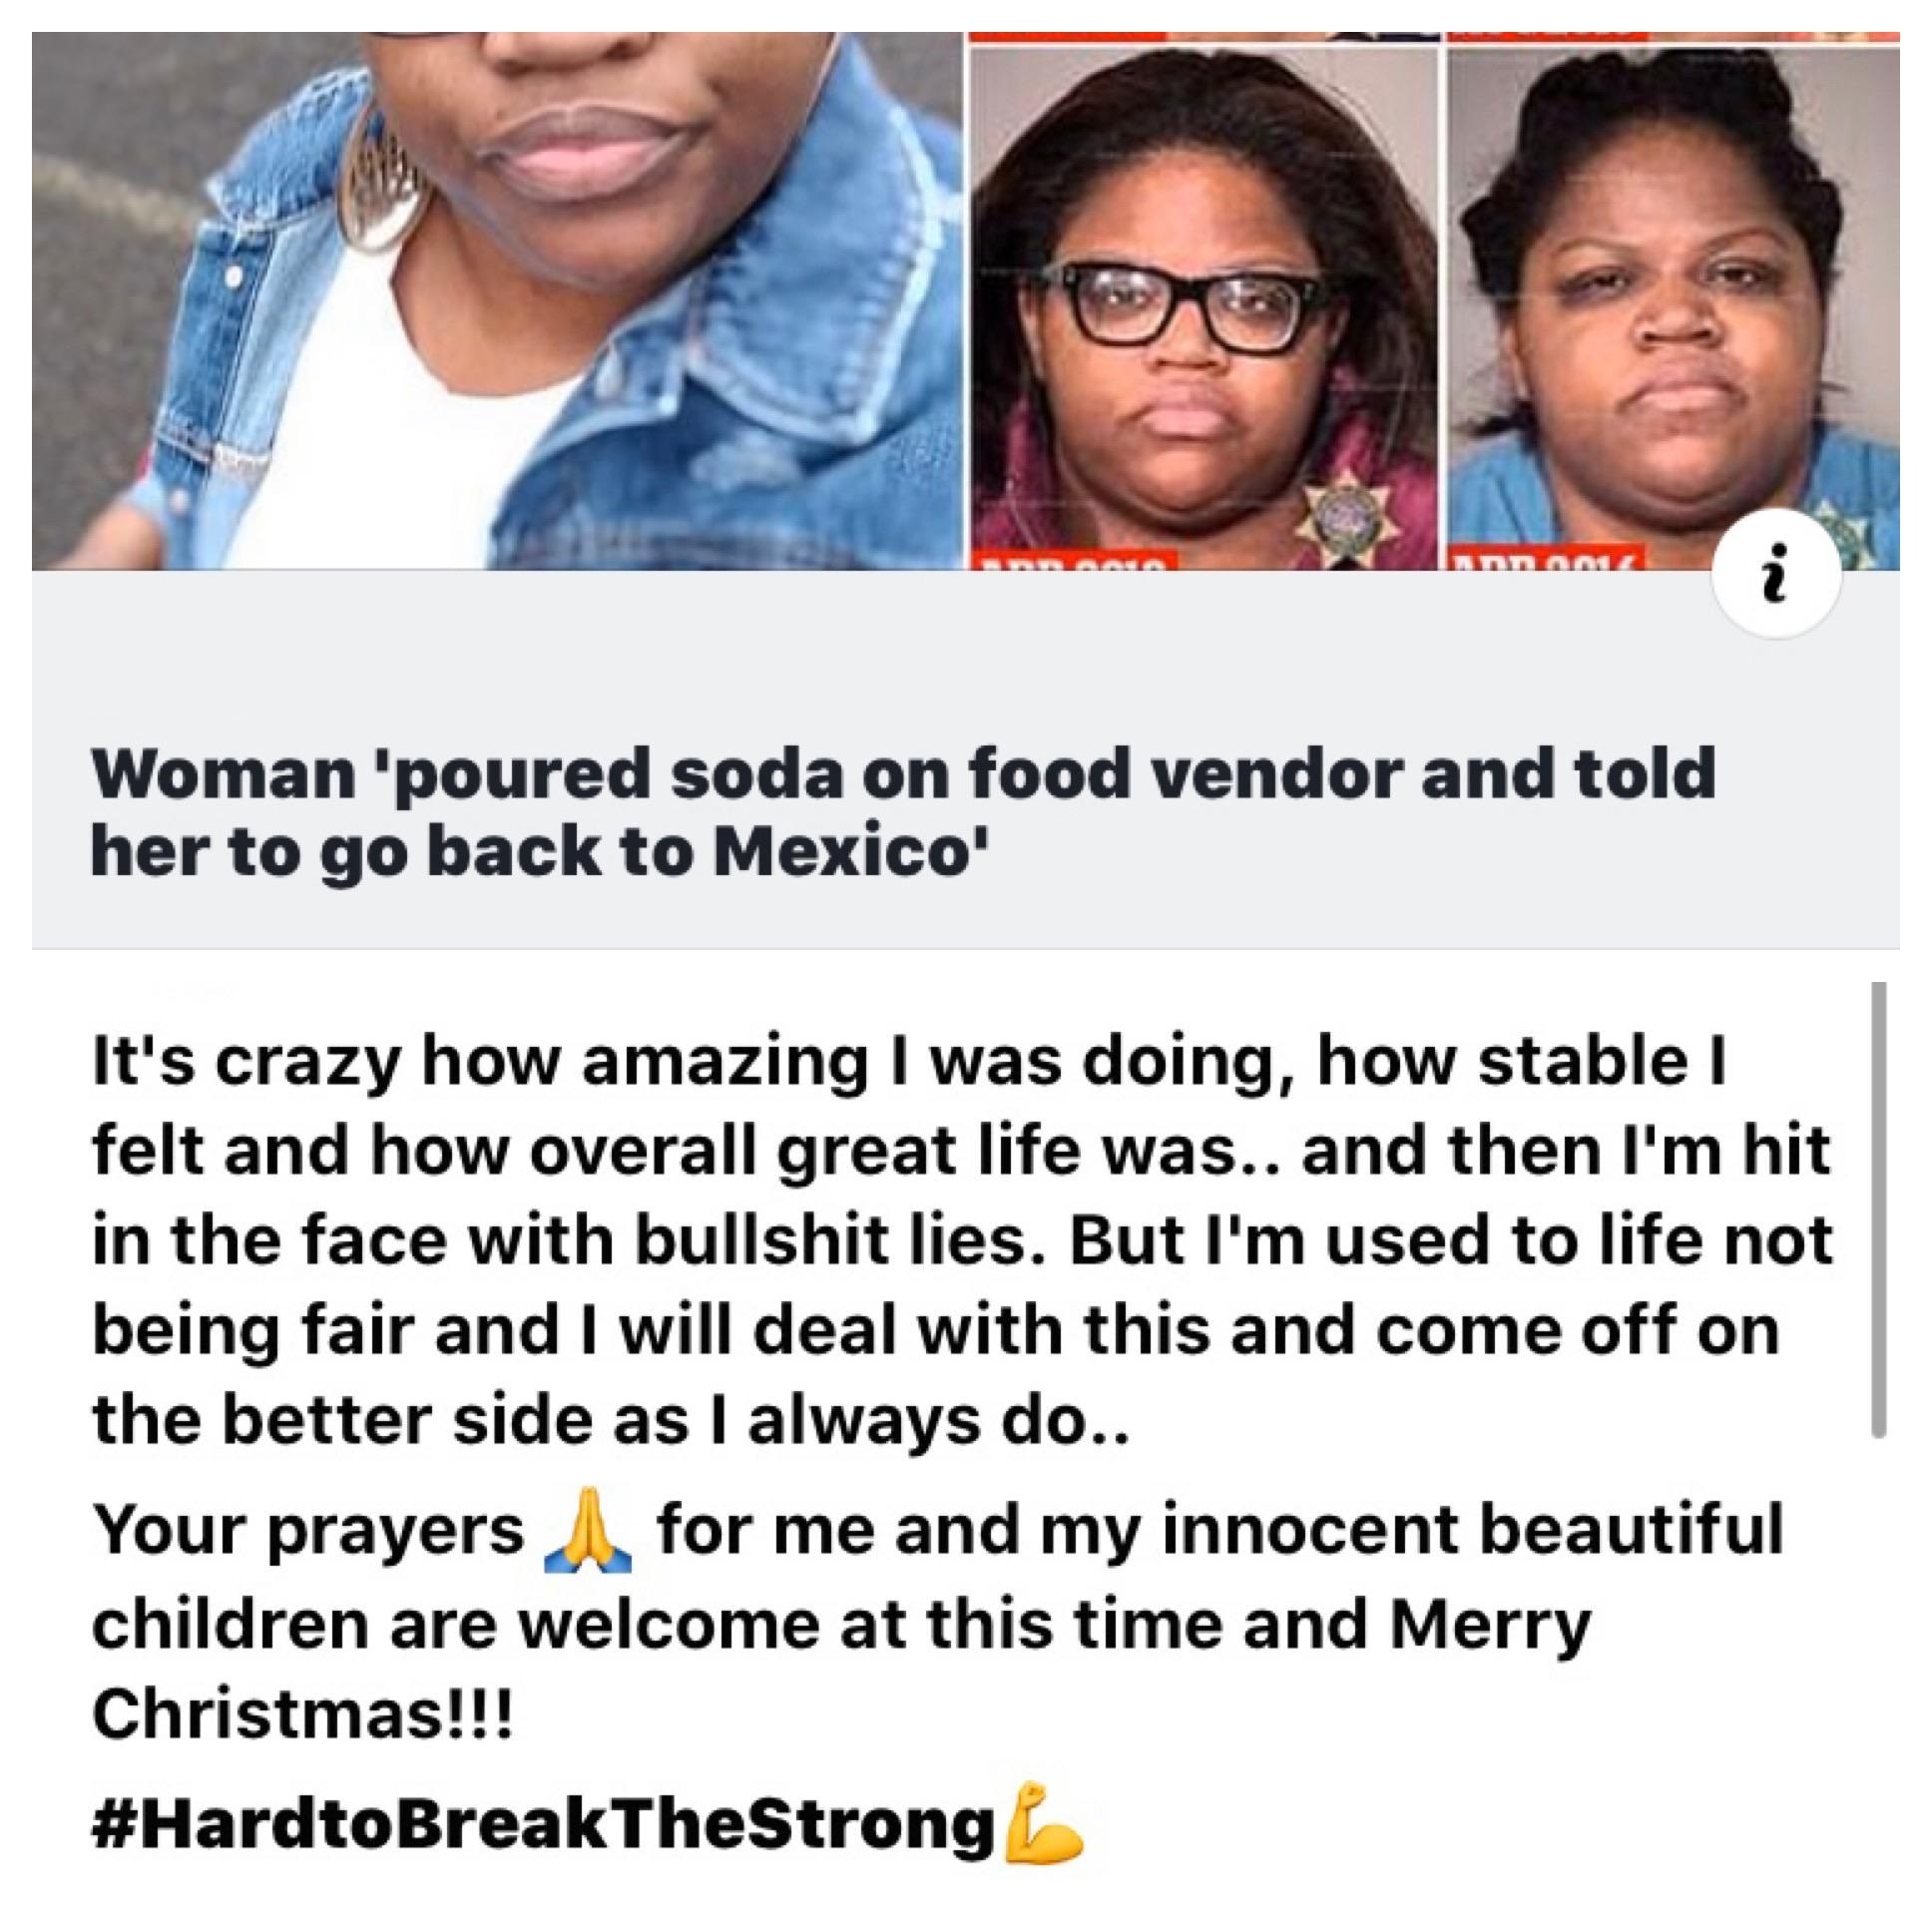 human behavior - Woman 'poured soda on food vendor and told her to go back to Mexico' It's crazy how amazing I was doing, how stable 1 felt and how overall great life was.. and then I'm hit in the face with bullshit lies. But I'm used to life not being fa